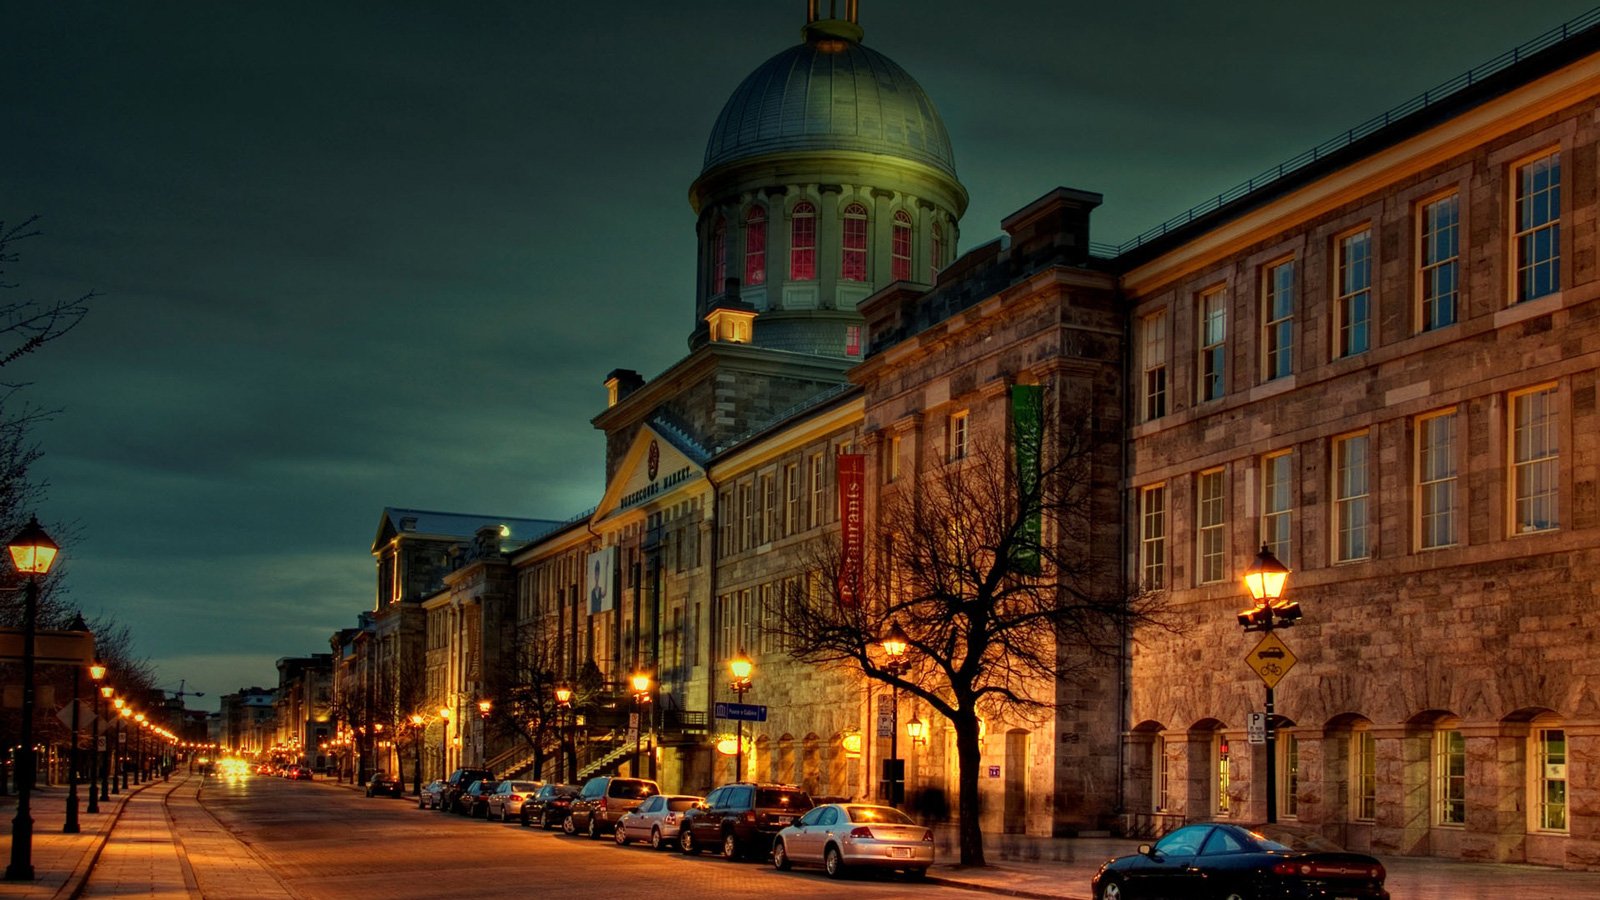 bonsecours-market-at-night